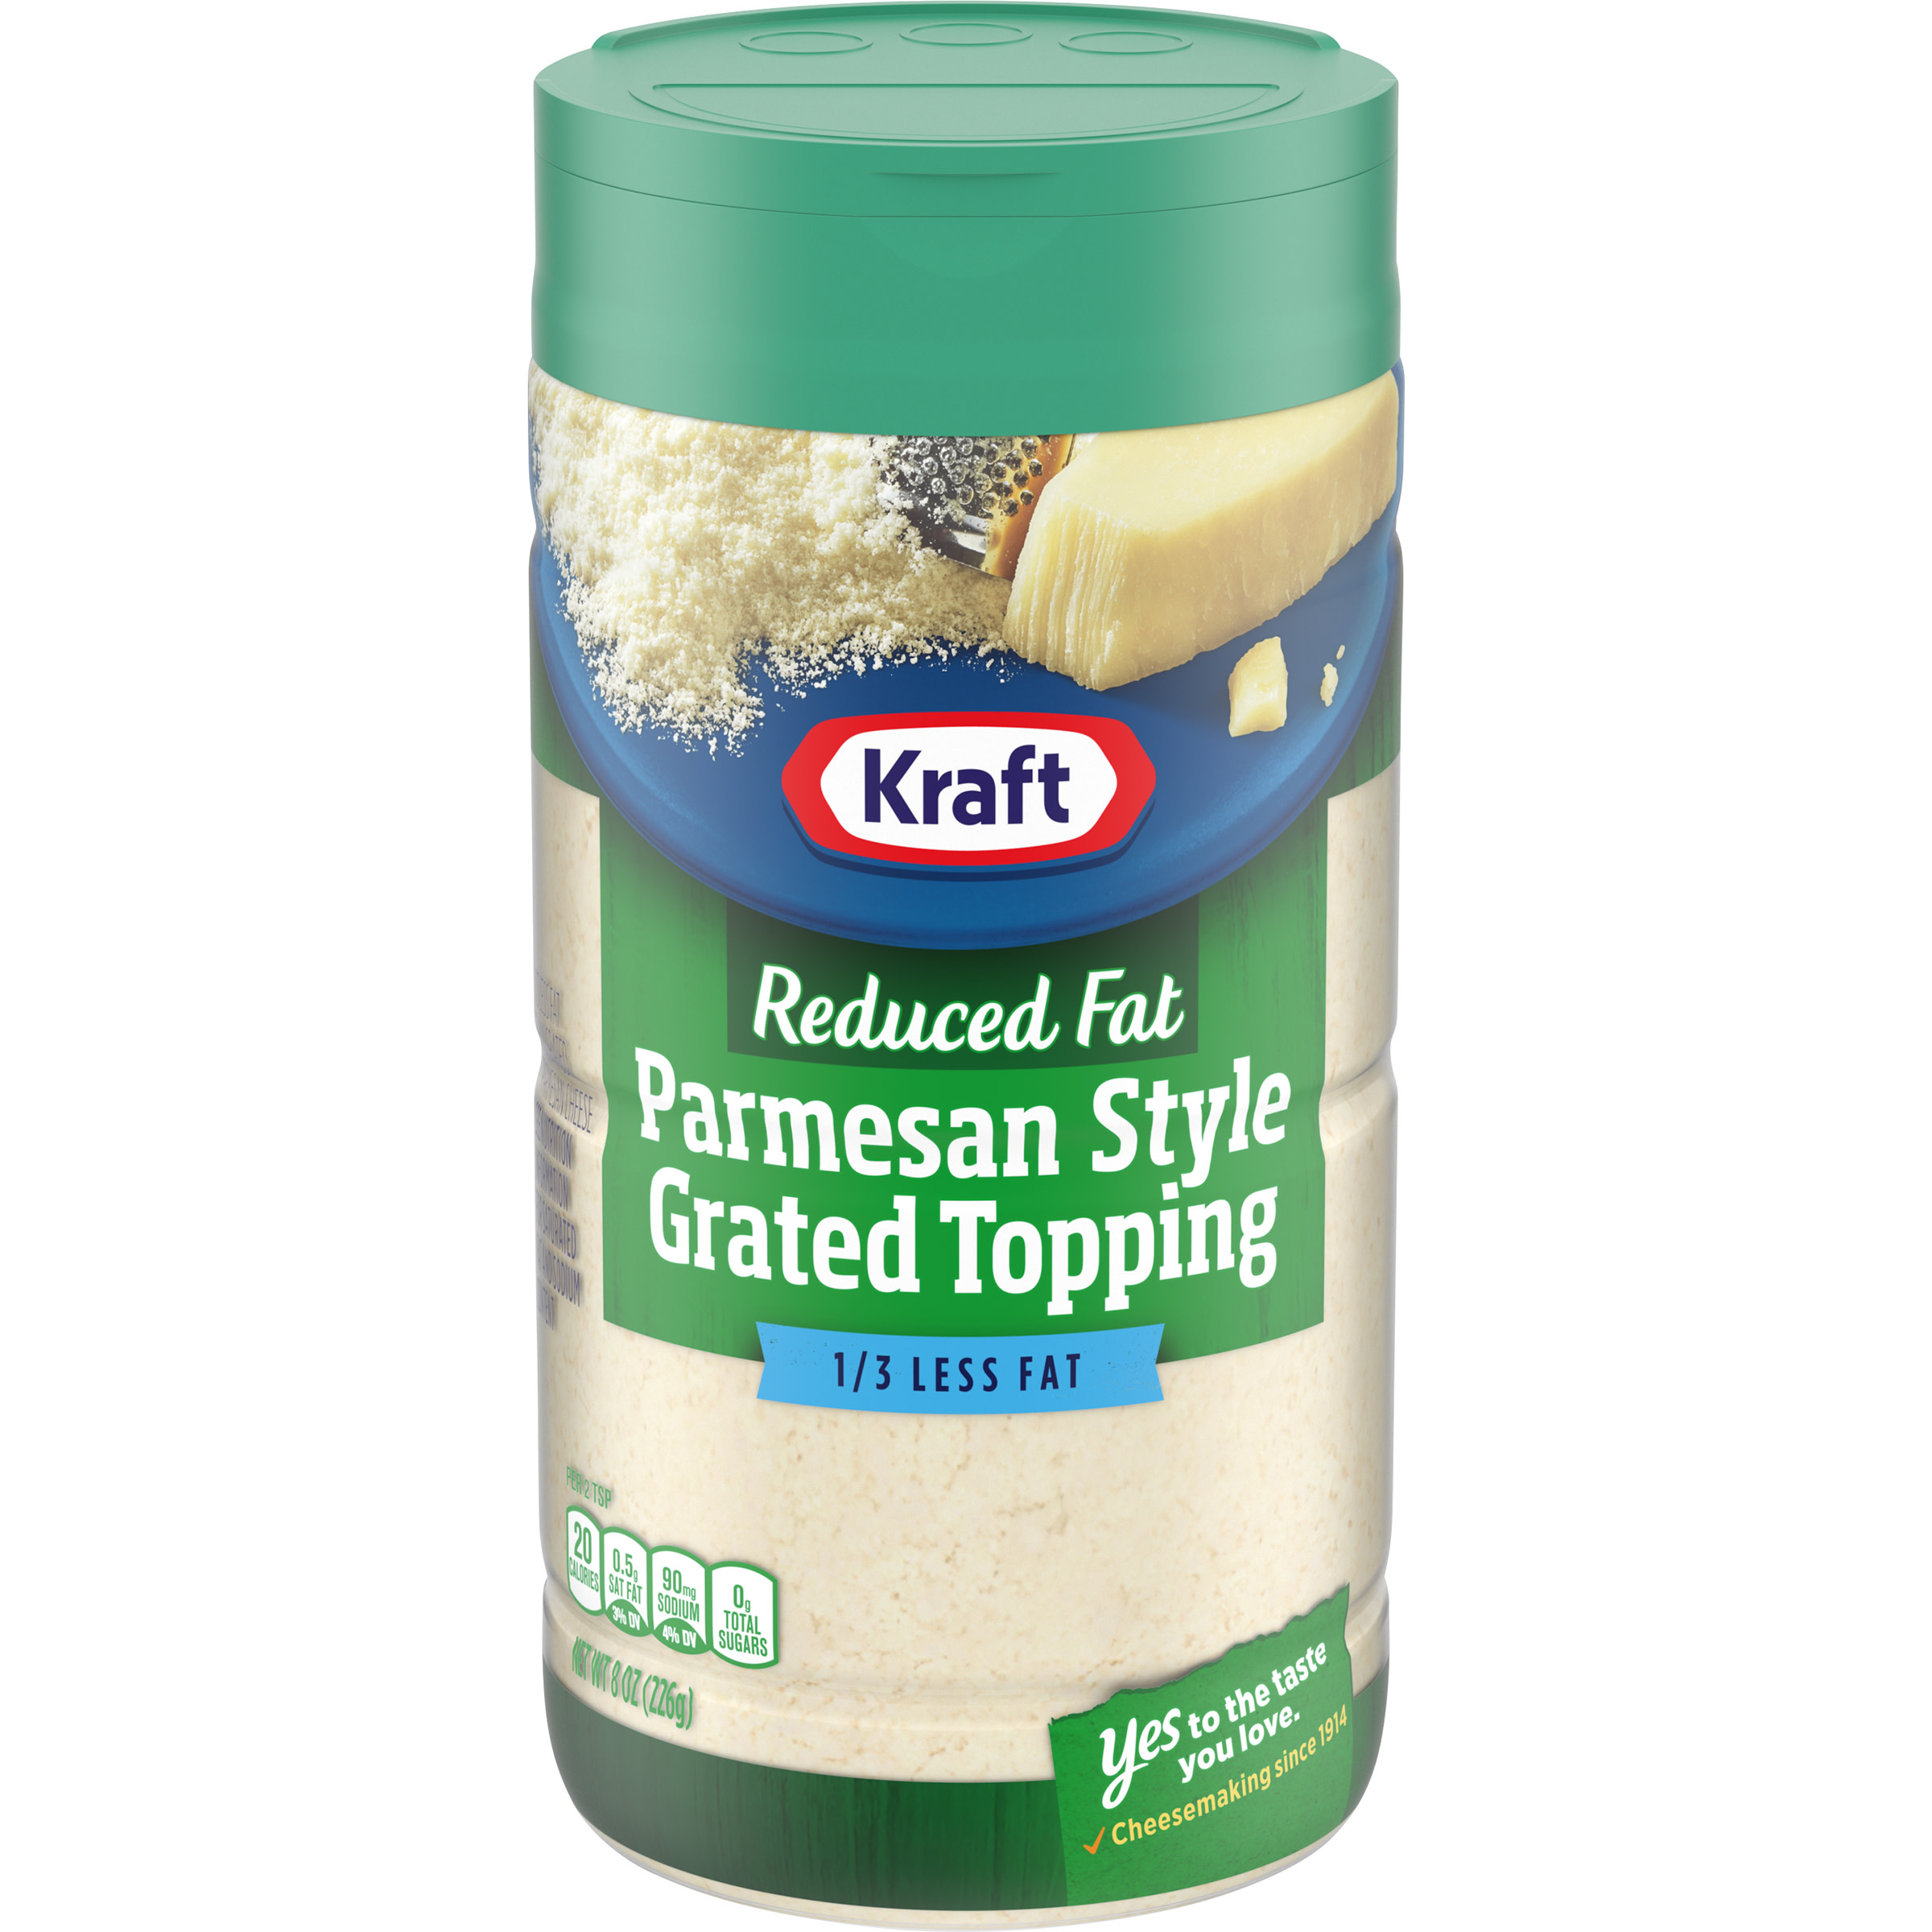 Kraft Parmesan Style Reduced Fat Grated Cheese Topping, 8 oz Shaker - image 1 of 8